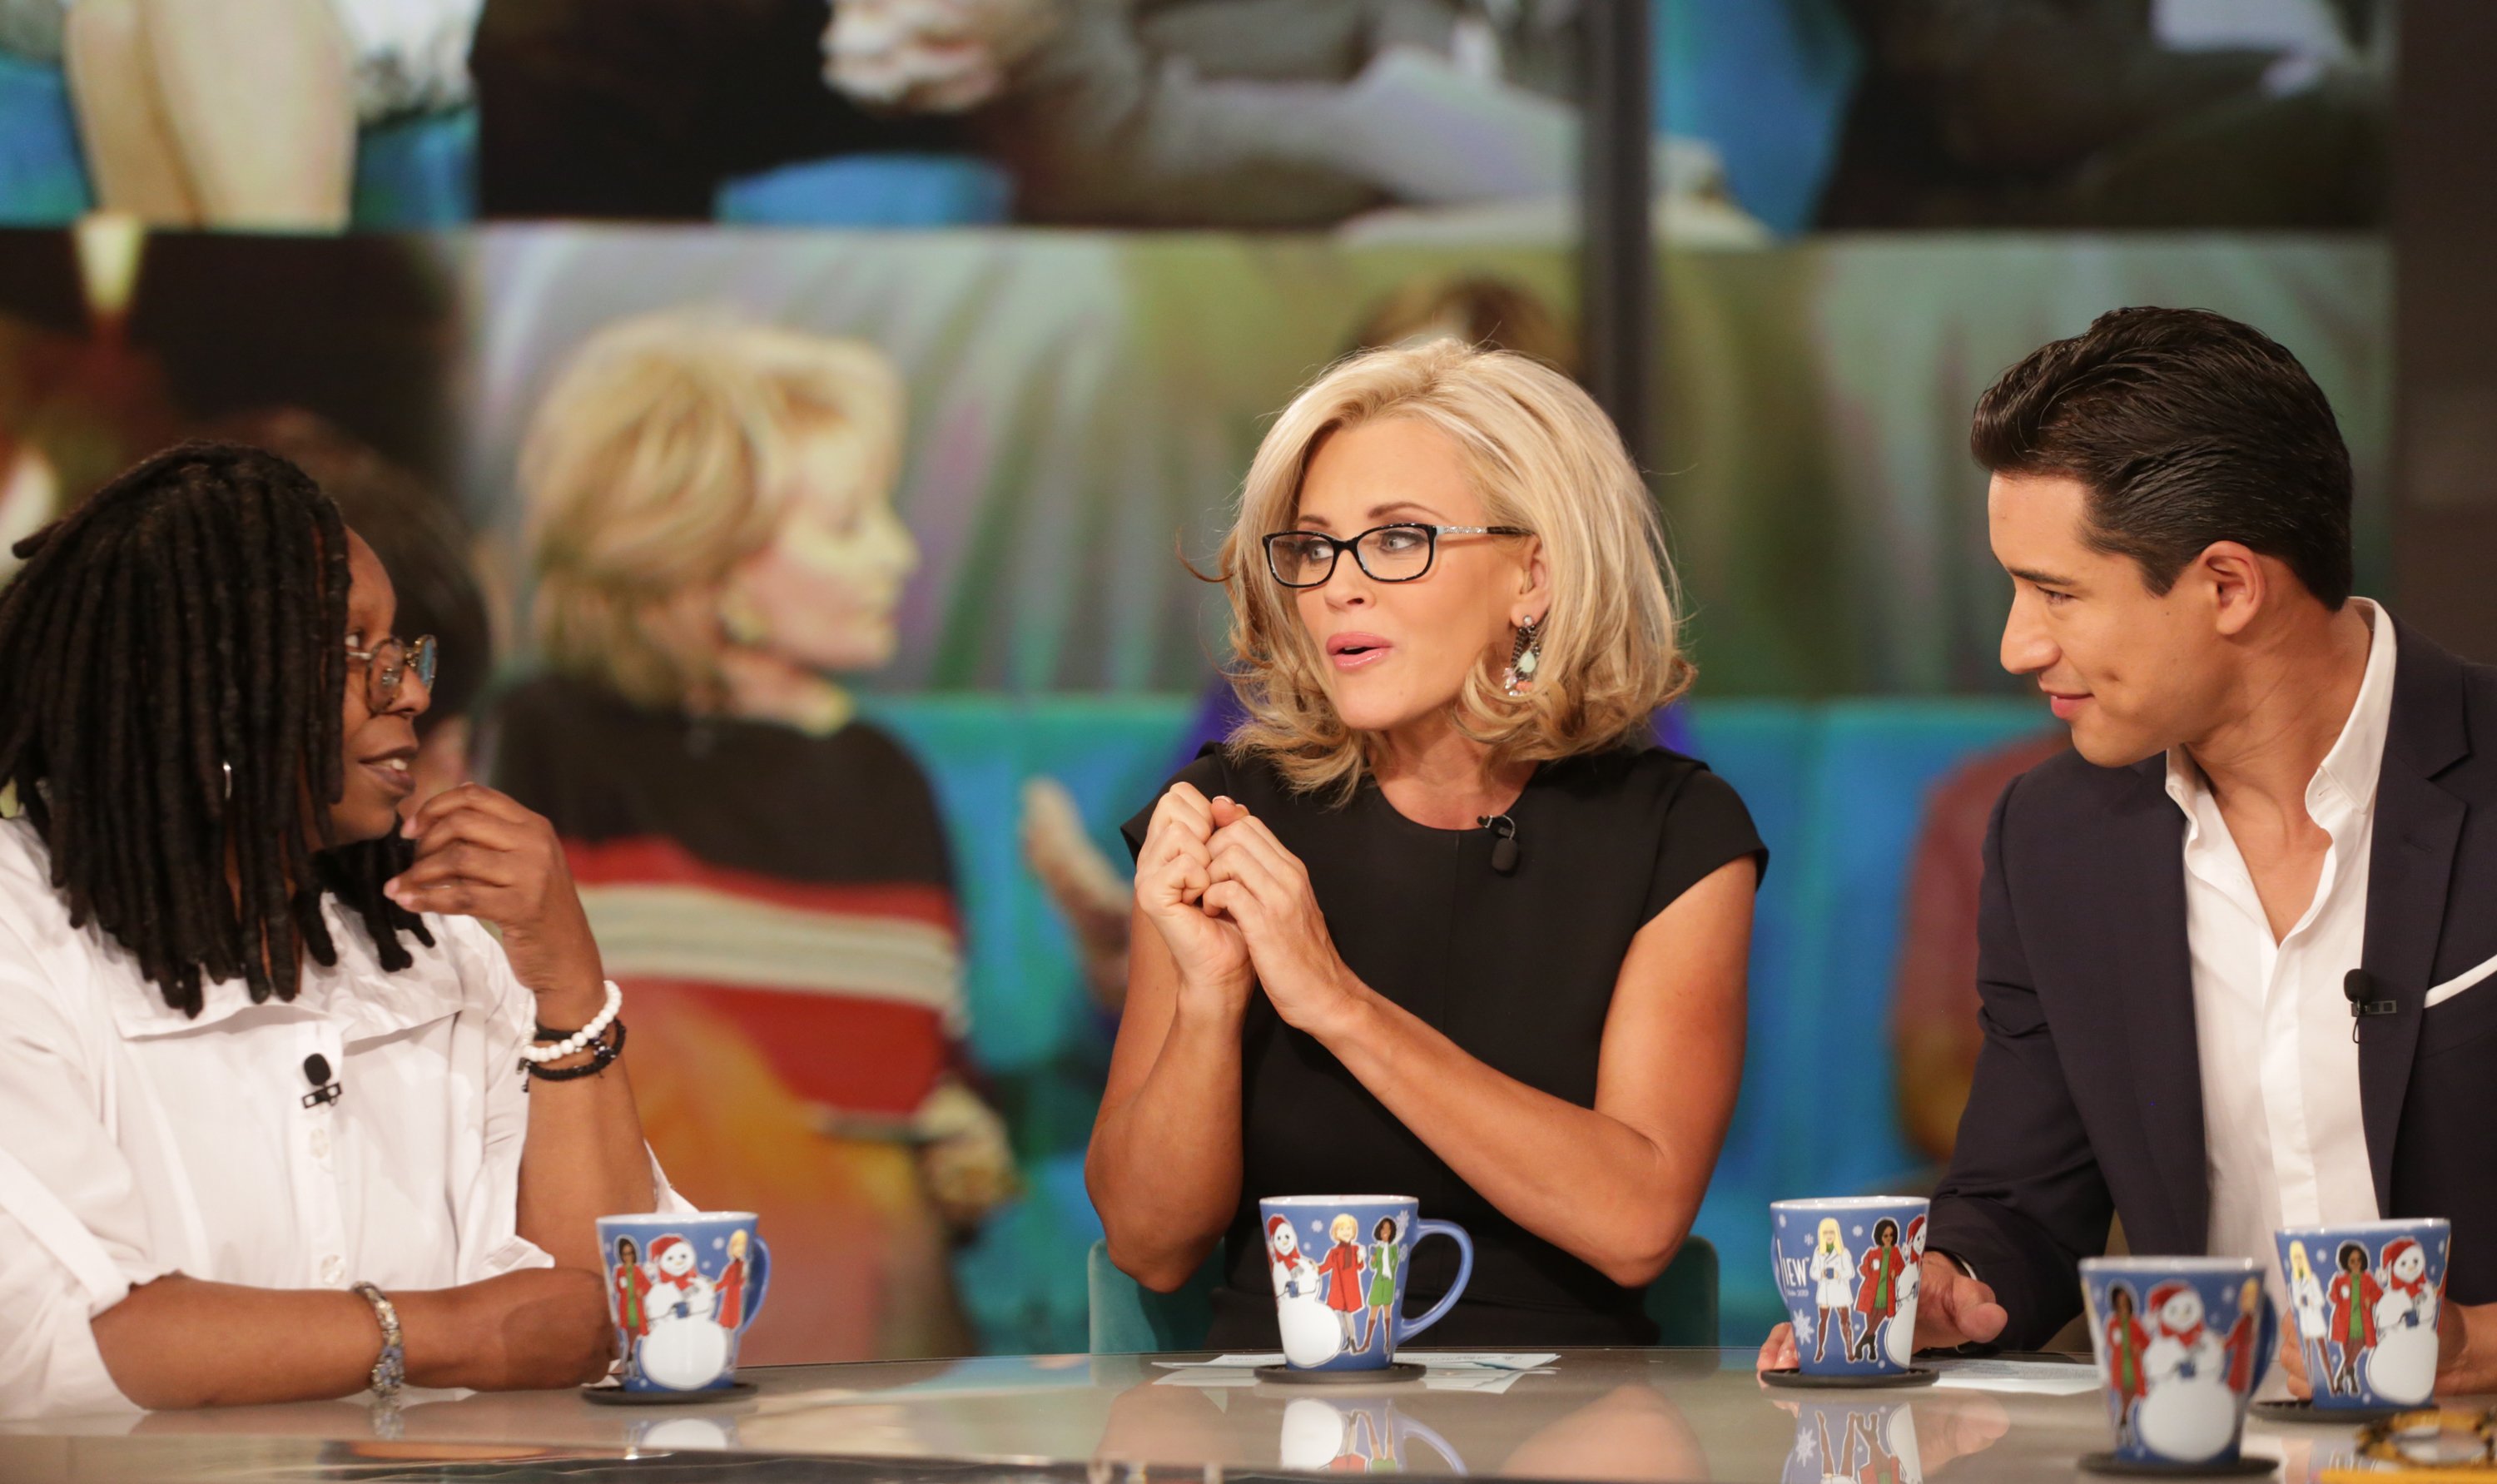 Whoopi Goldberg, Jenny McCarthy, and Mario Lopez on the set of 'The View'